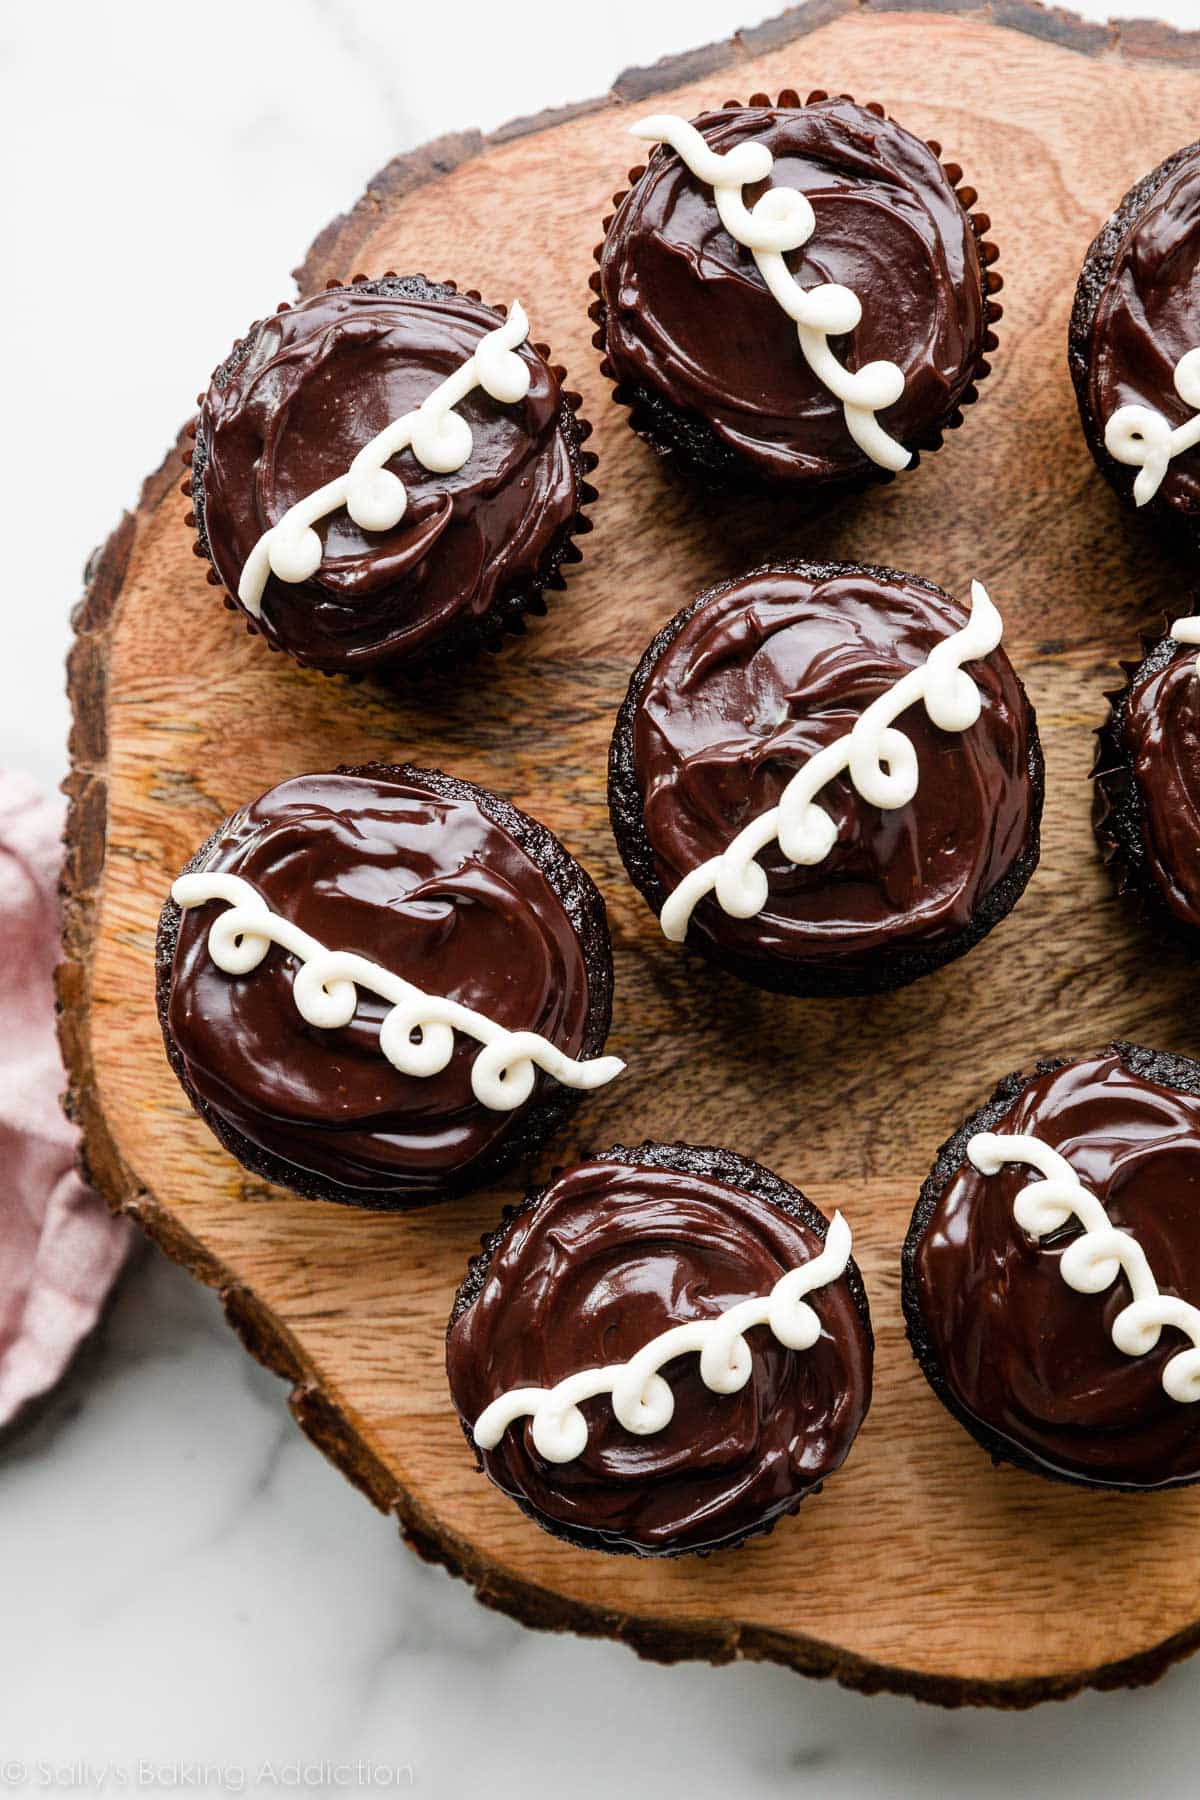 homemade version of Hostess cream-filled chocolate cupcakes on wooden cake stand.